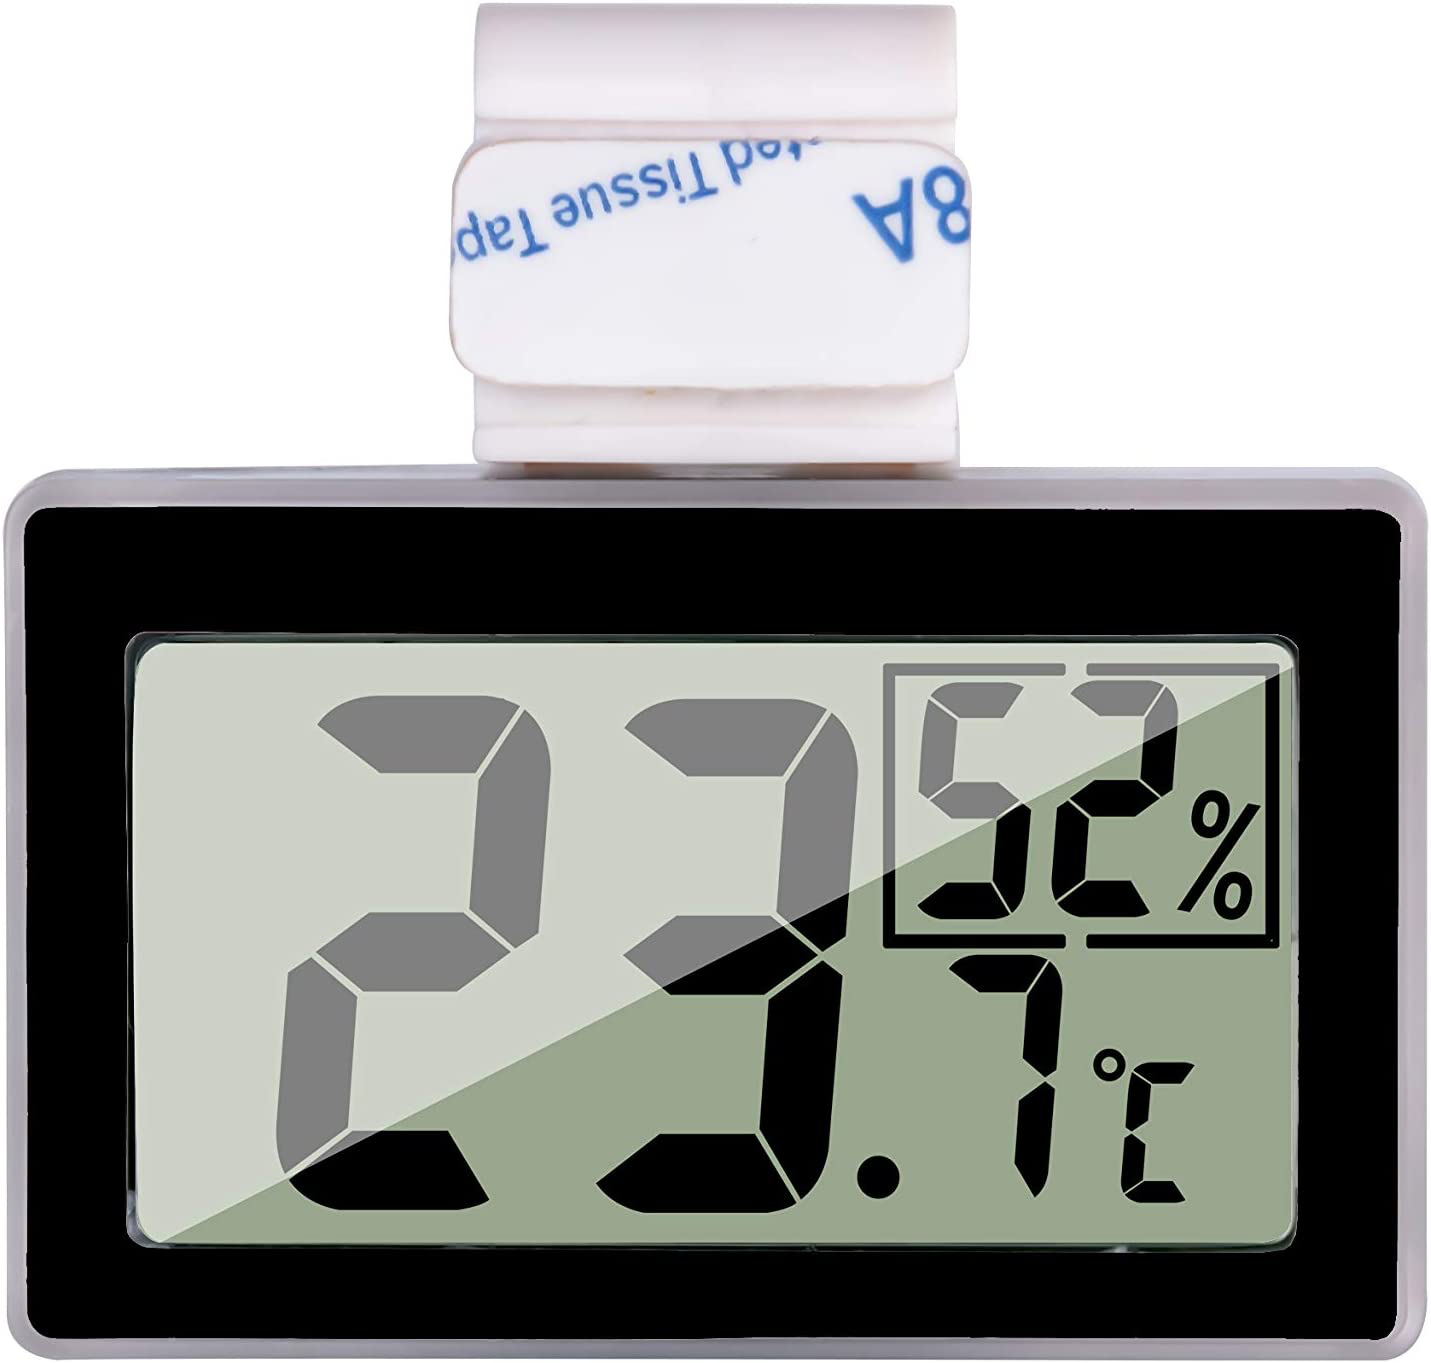 Reptile Thermometer Humidity and Temperature Sensor Gauges Reptile Digital Thermometer Digital Reptile Tank Thermometer Hygrometer with Hook Ideal for Reptile Tanks, Terrariums